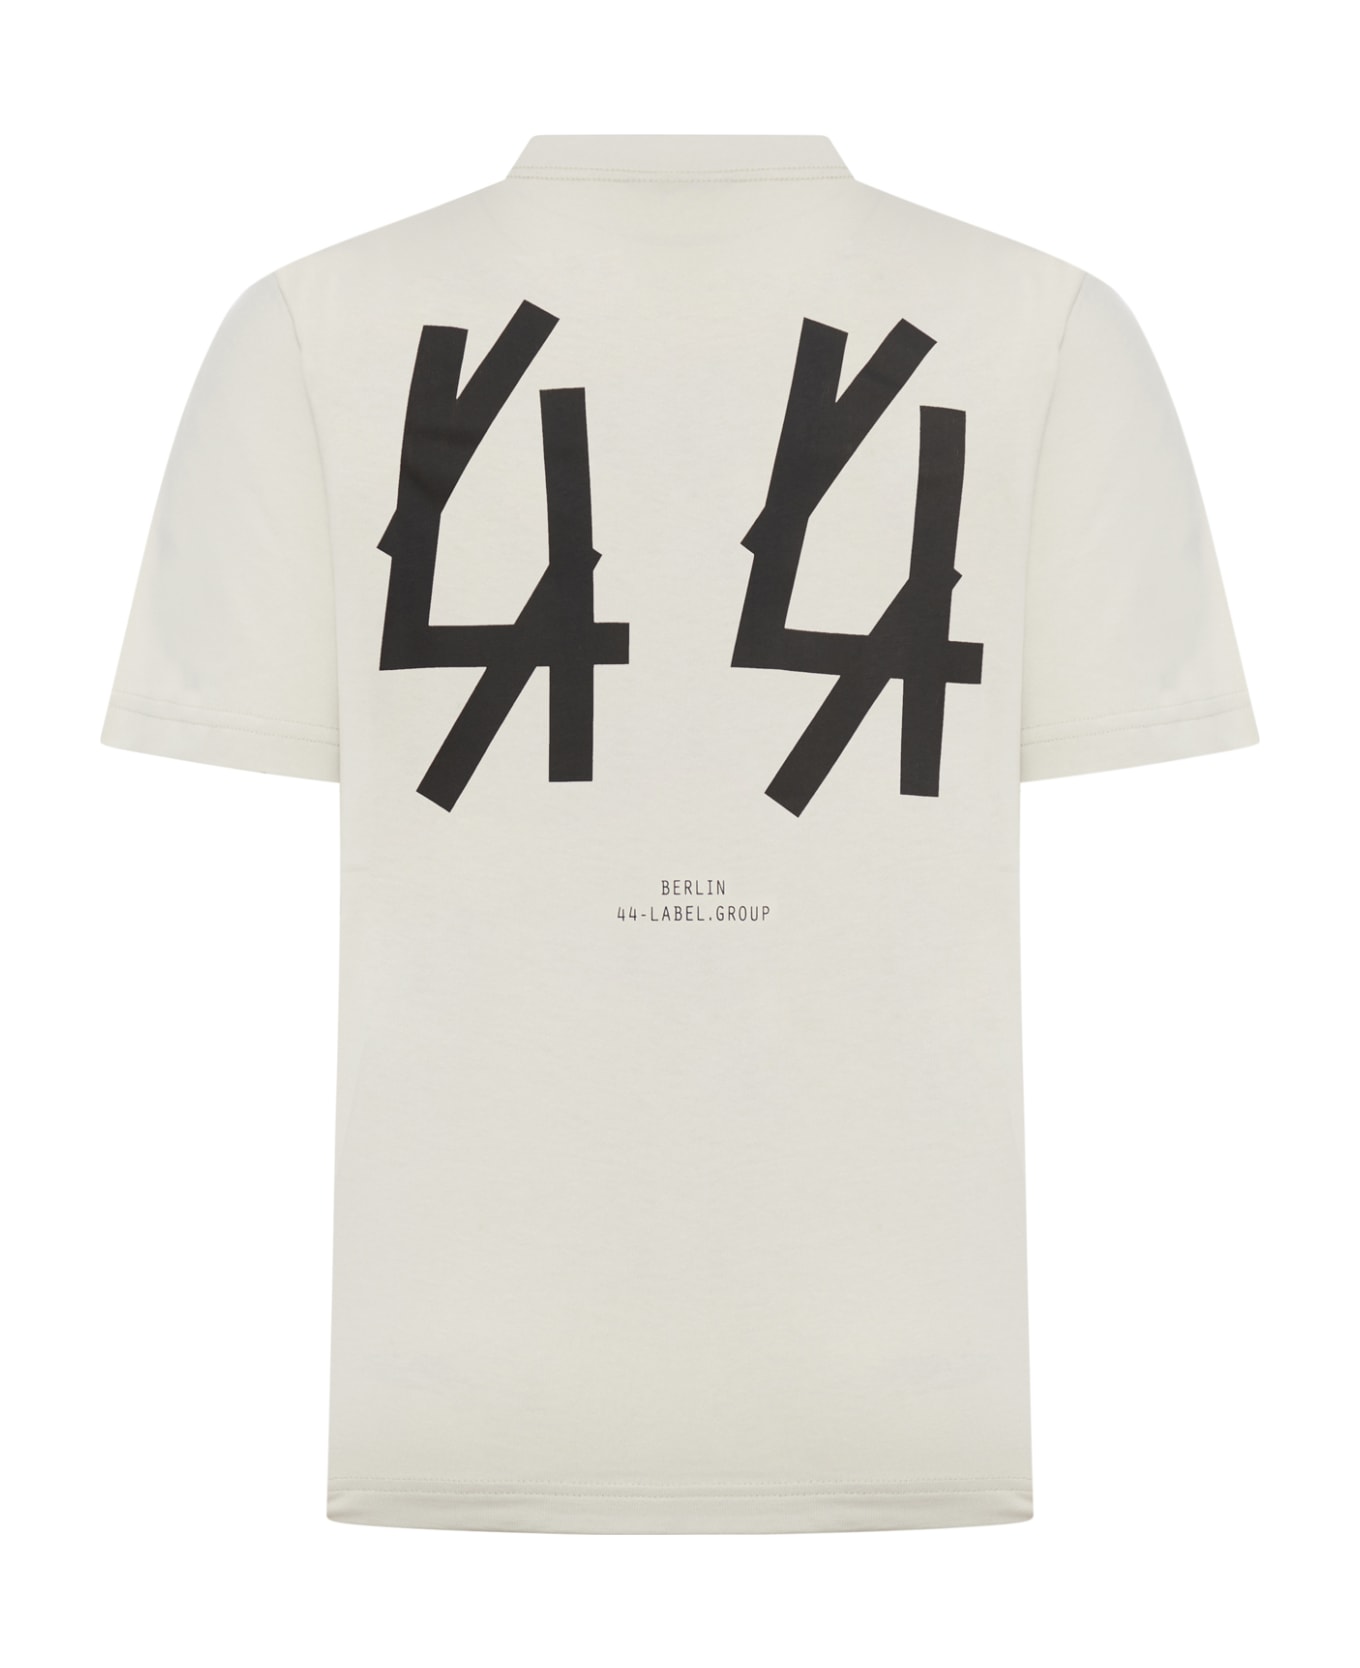 44 Label Group Classic Tee - Solid Black